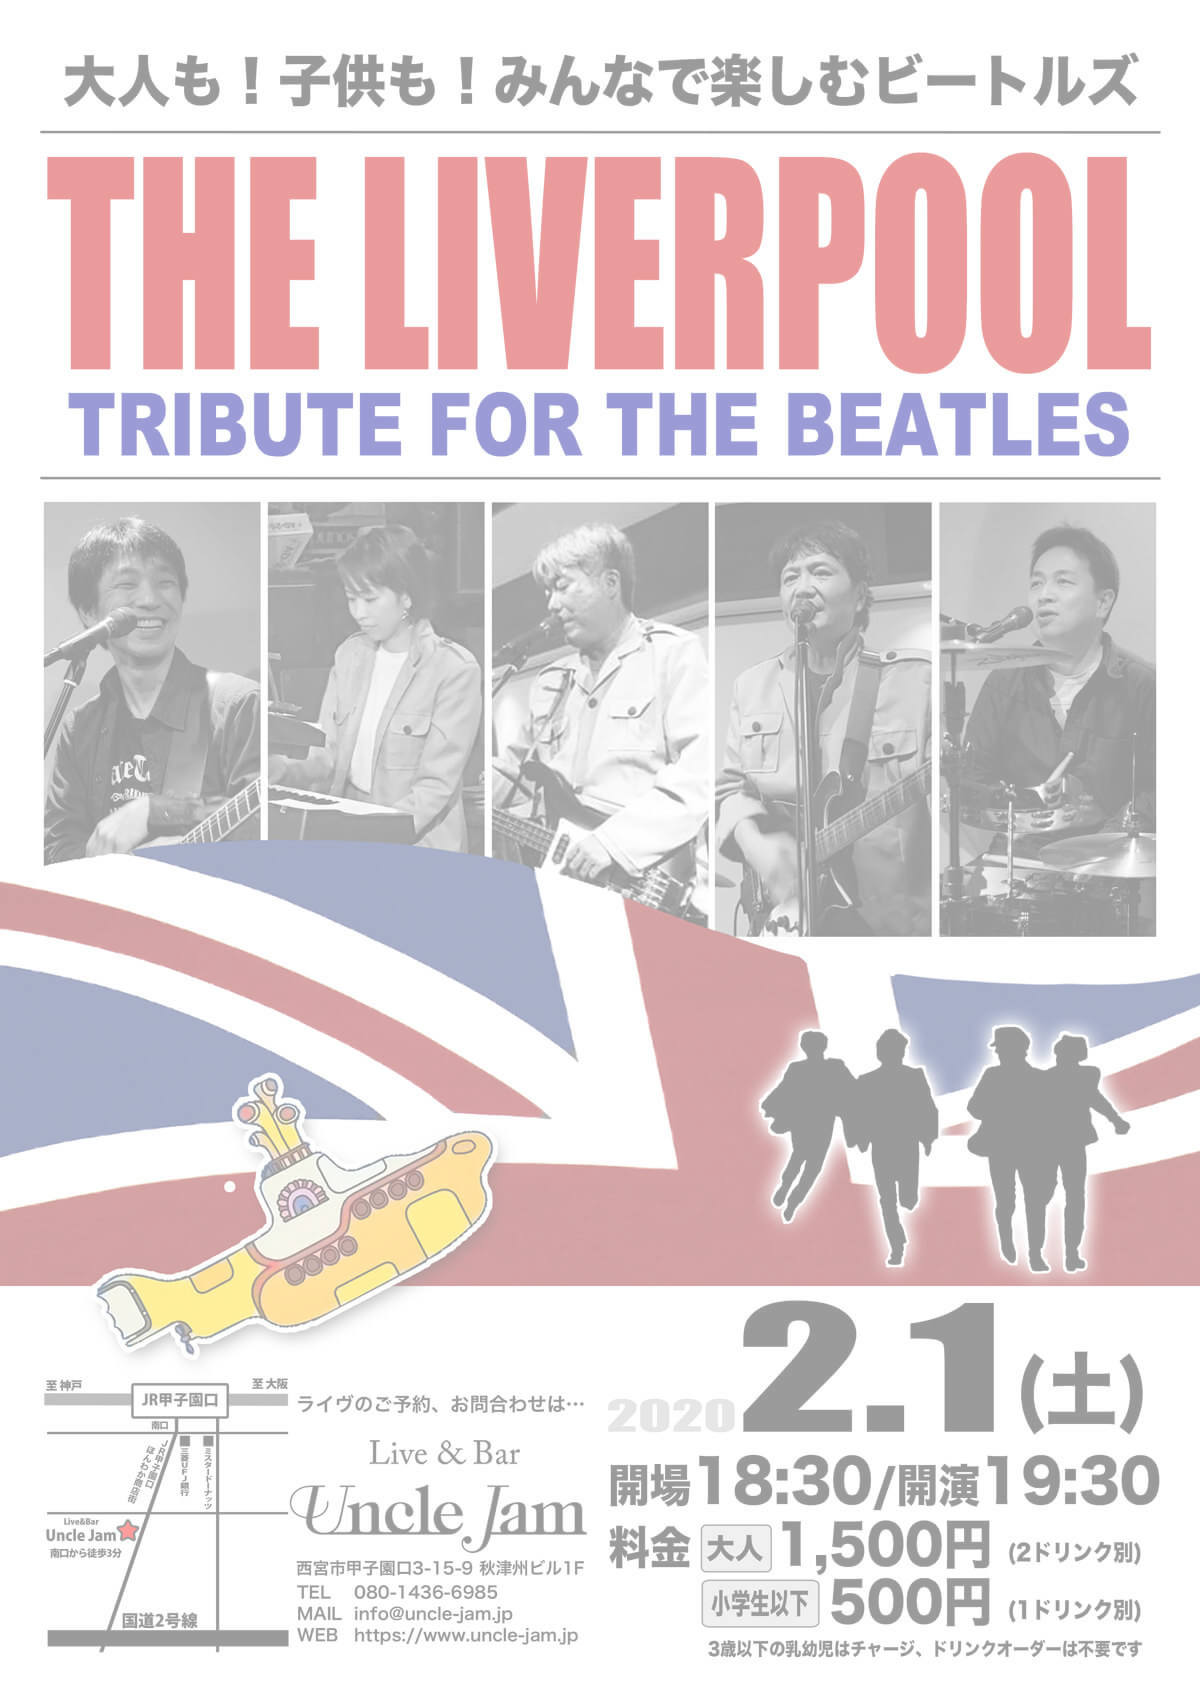 2020-02-01_The_Liverpool